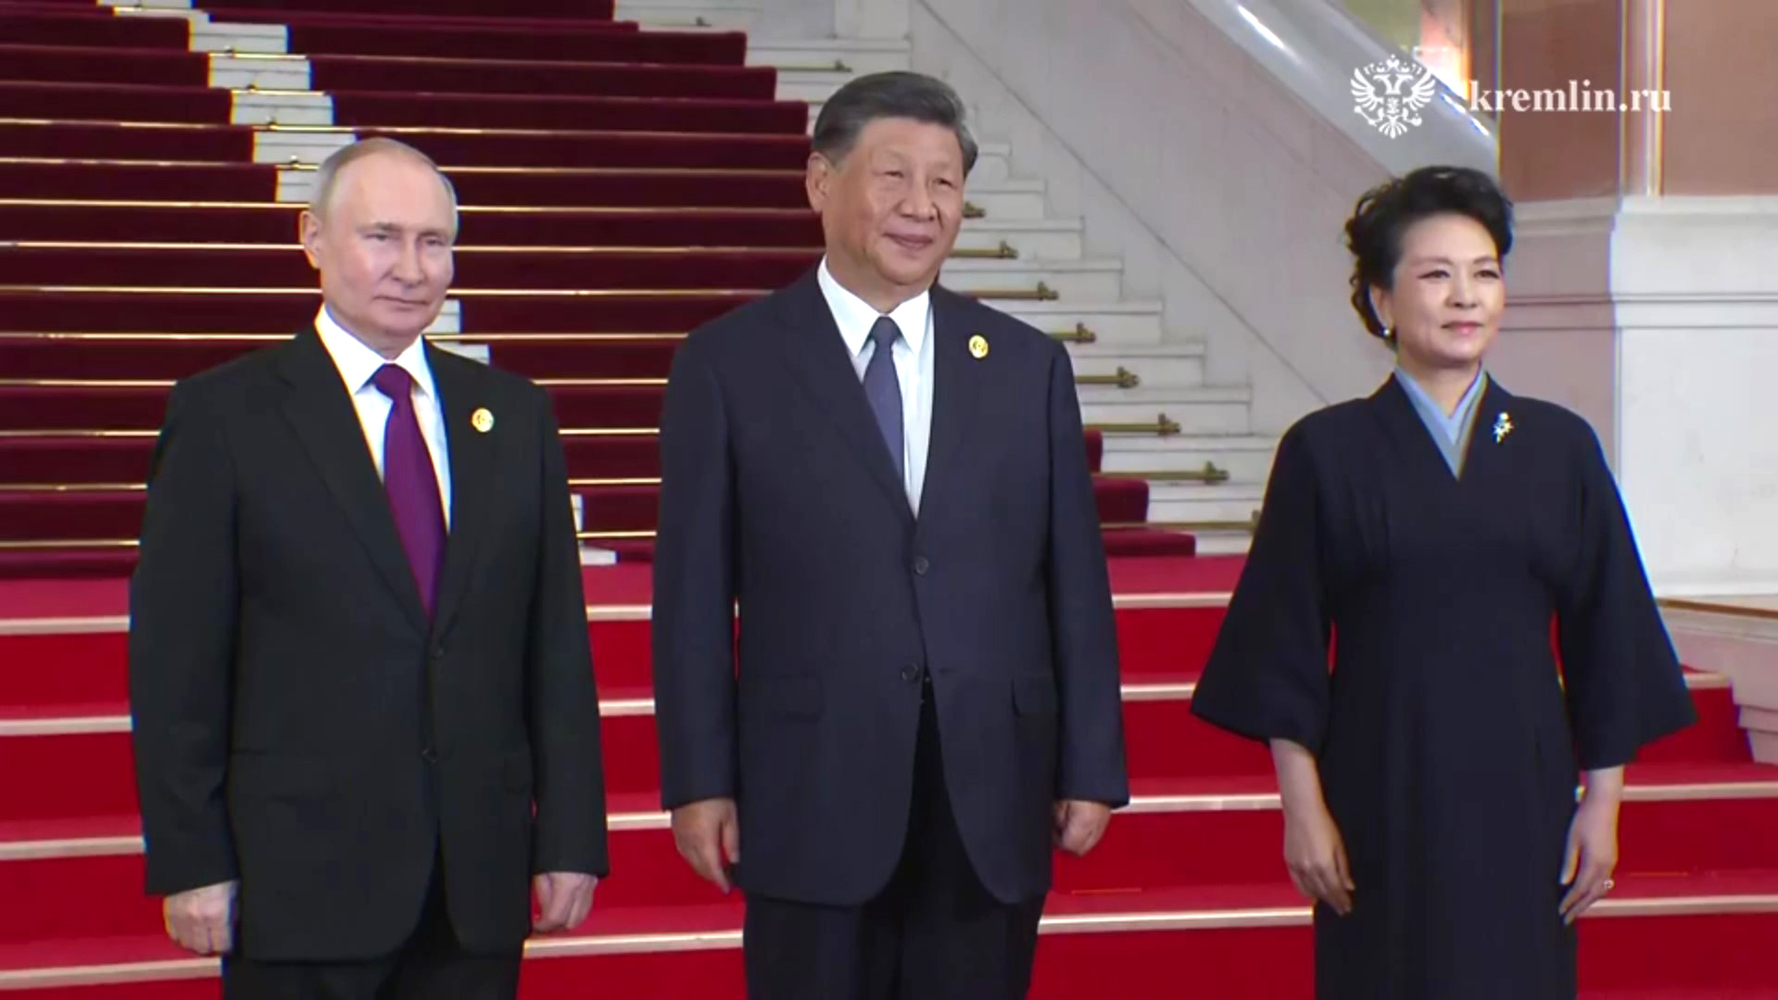 Prime Minister of Thailand in pink socks, smiling Xi: footage of Putin’s visit to China